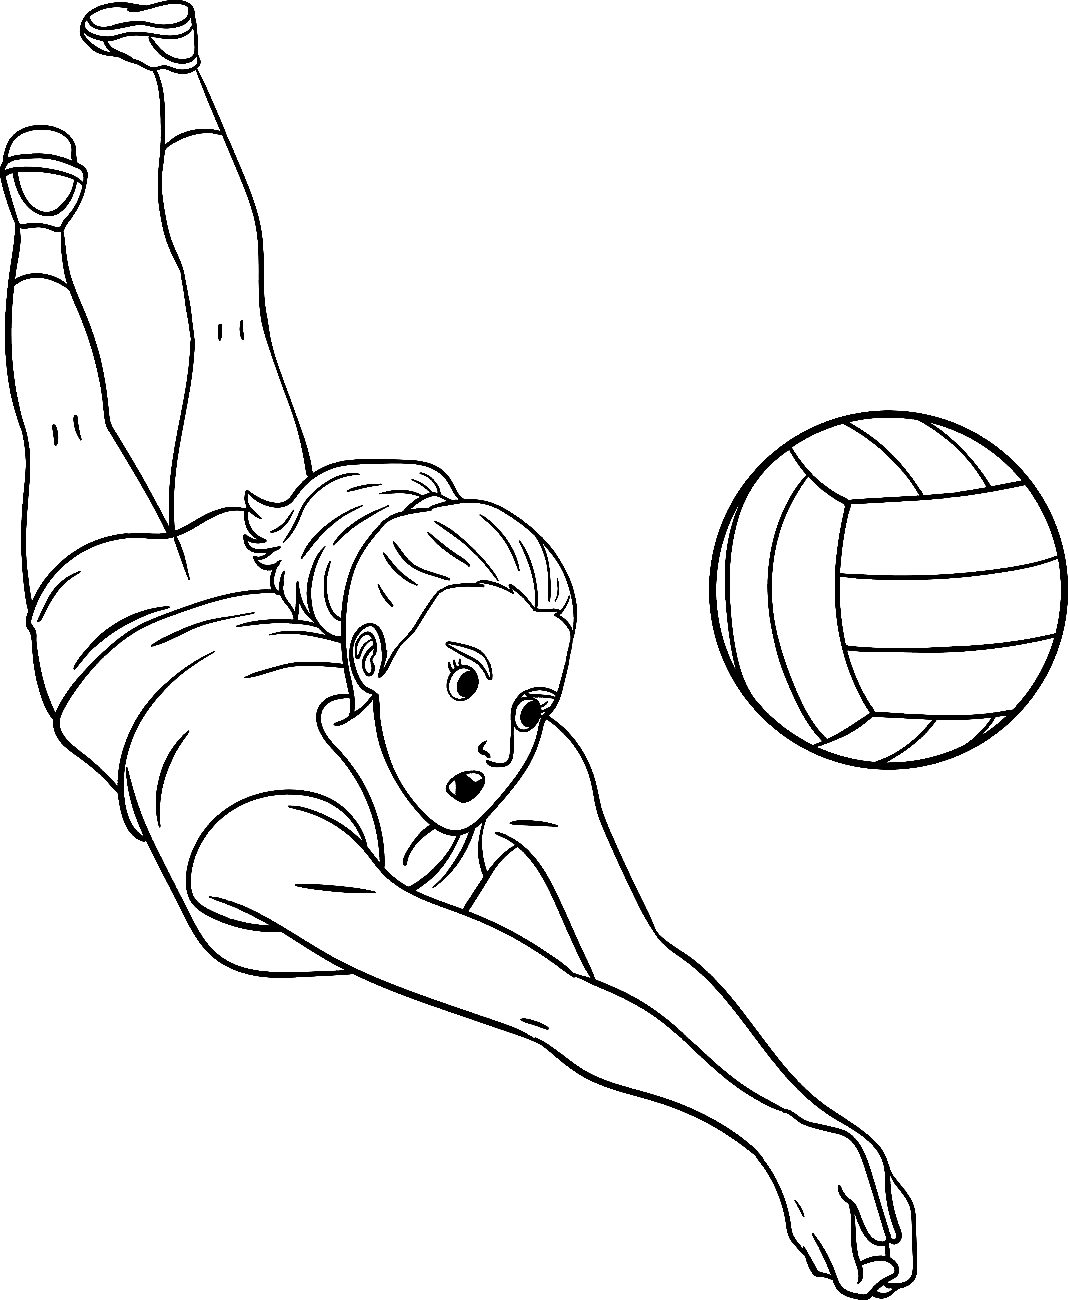 Imprimer le volley-ball du volley-ball